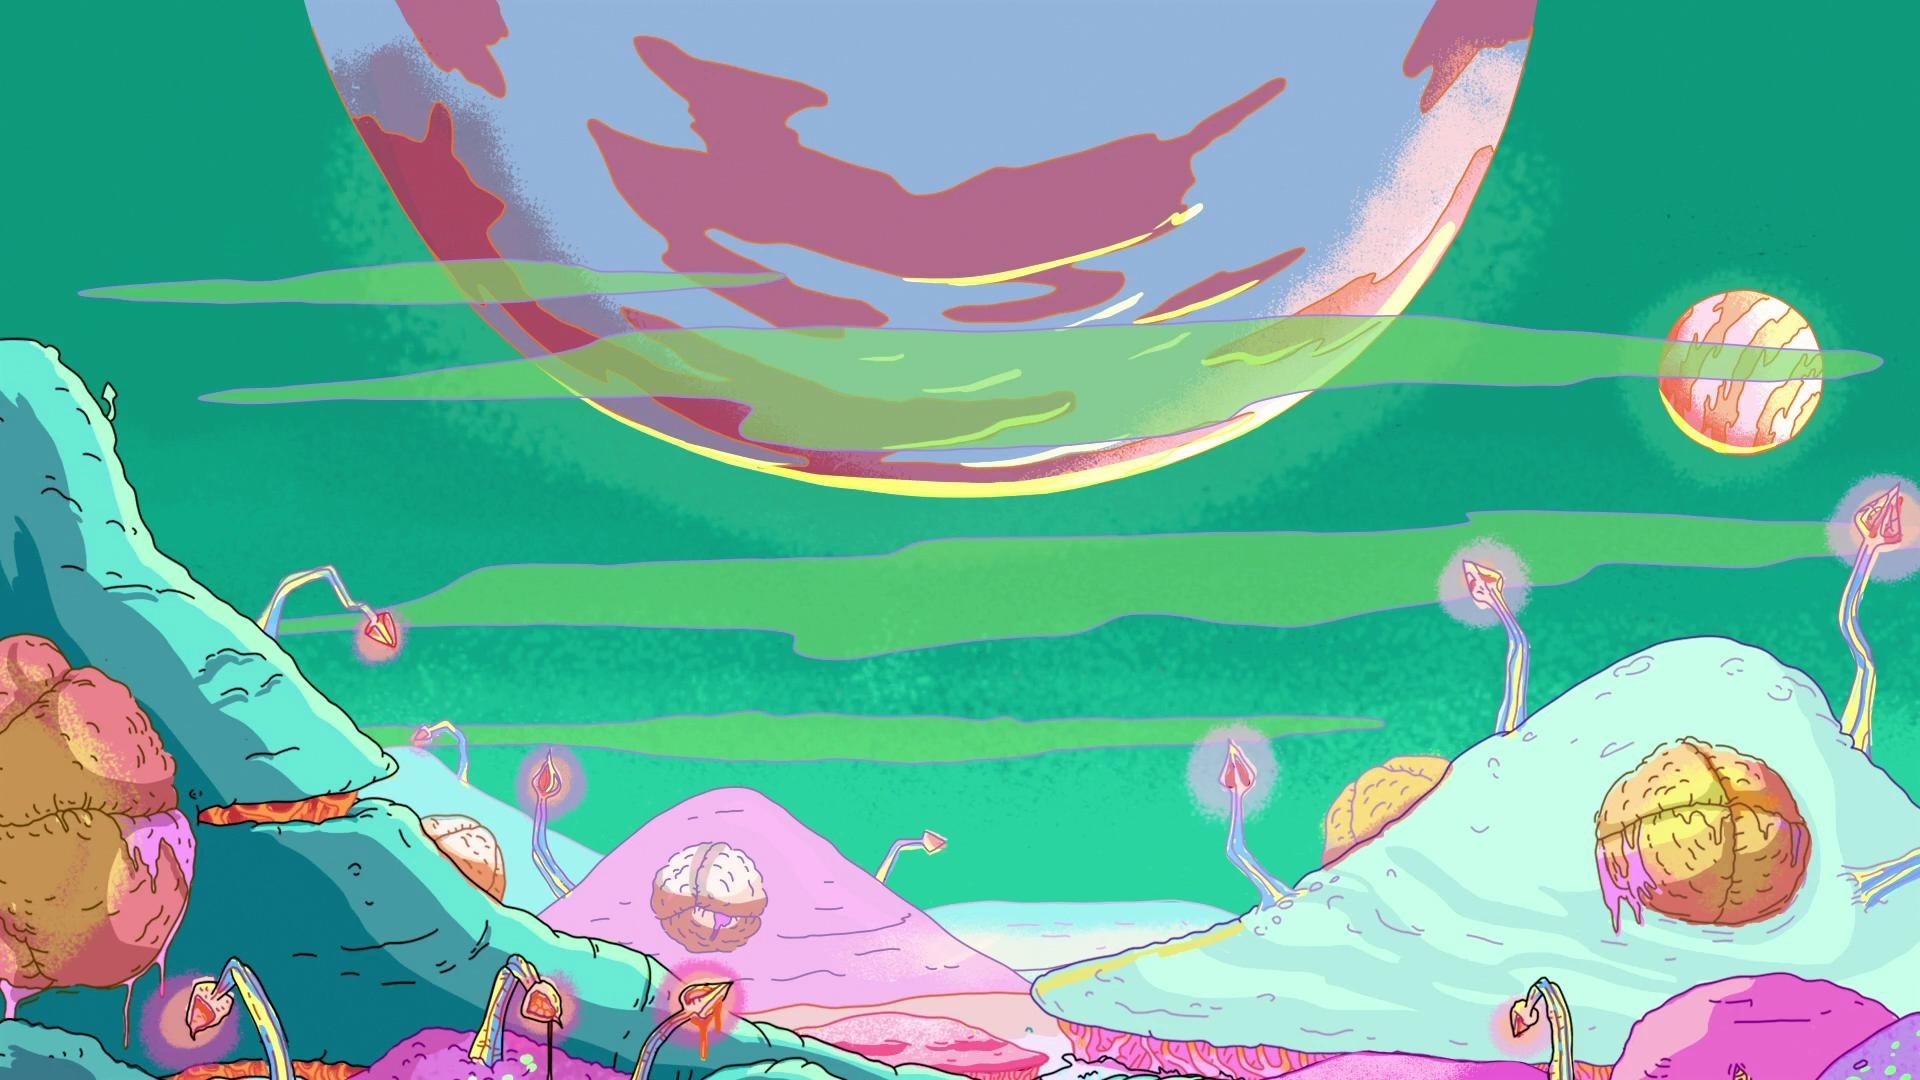 Rick n Morty Trailer Wallpaper with high-resolution 1920x1080 pixel. You can use this poster wallpaper for your Desktop Computers, Mac Screensavers, Windows Backgrounds, iPhone Wallpapers, Tablet or Android Lock screen and another Mobile device